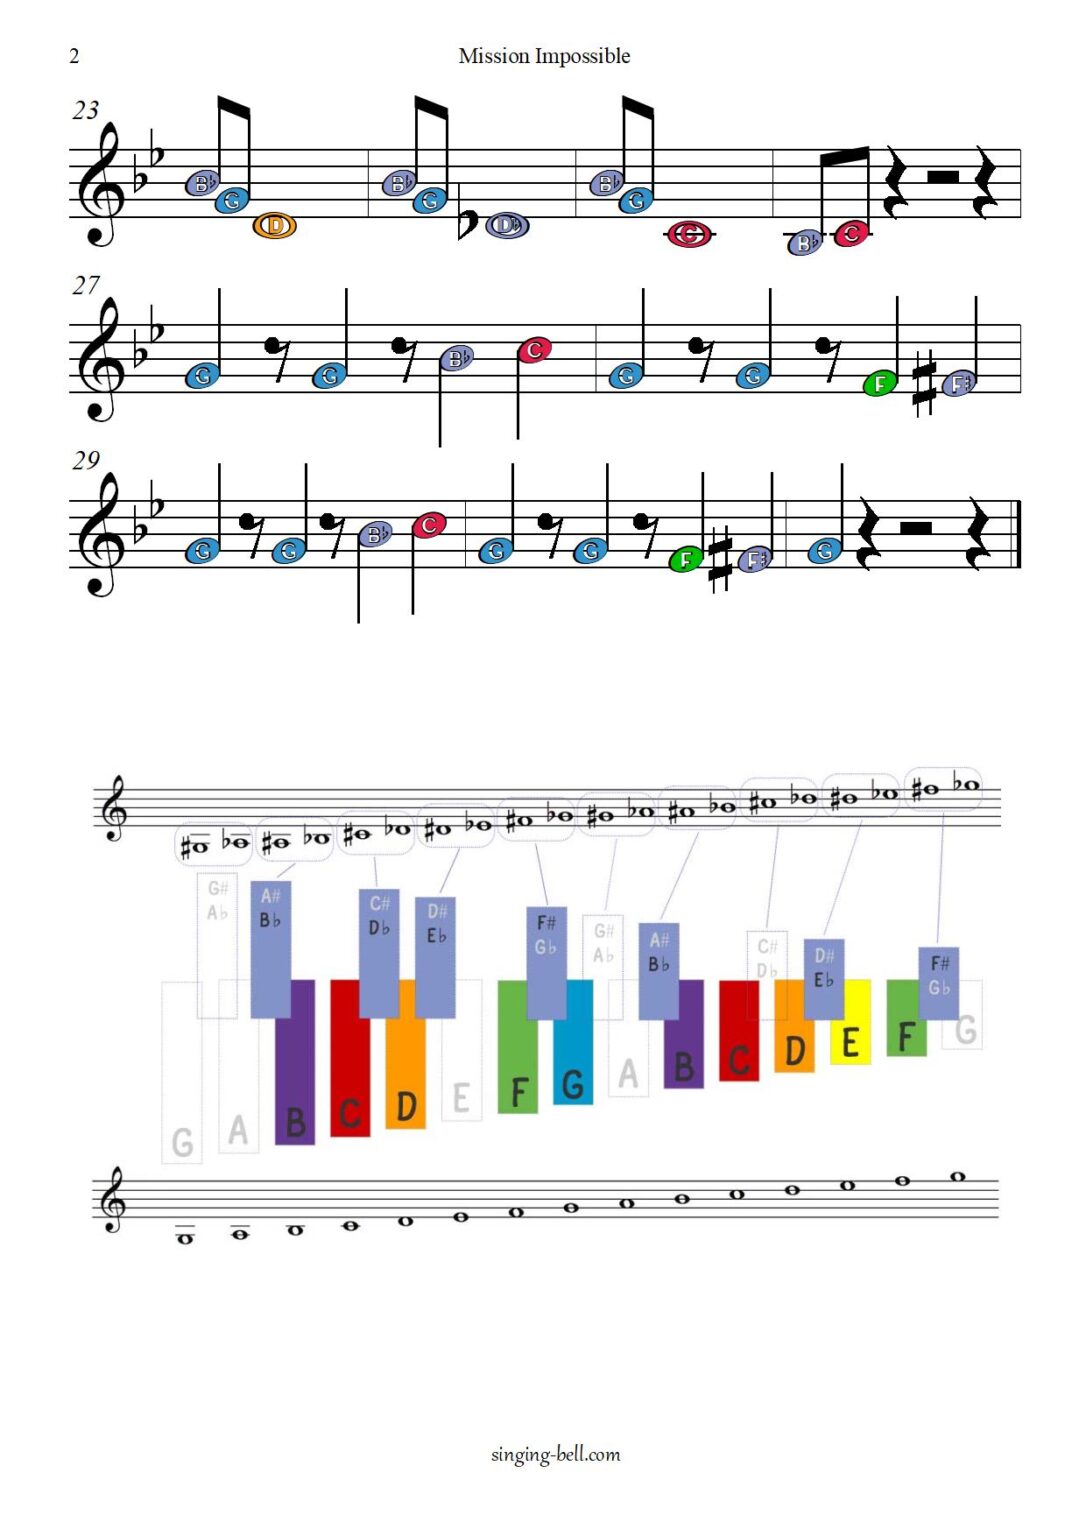 Mission Impossible for Glockenspiel / Xylophone Note Chart